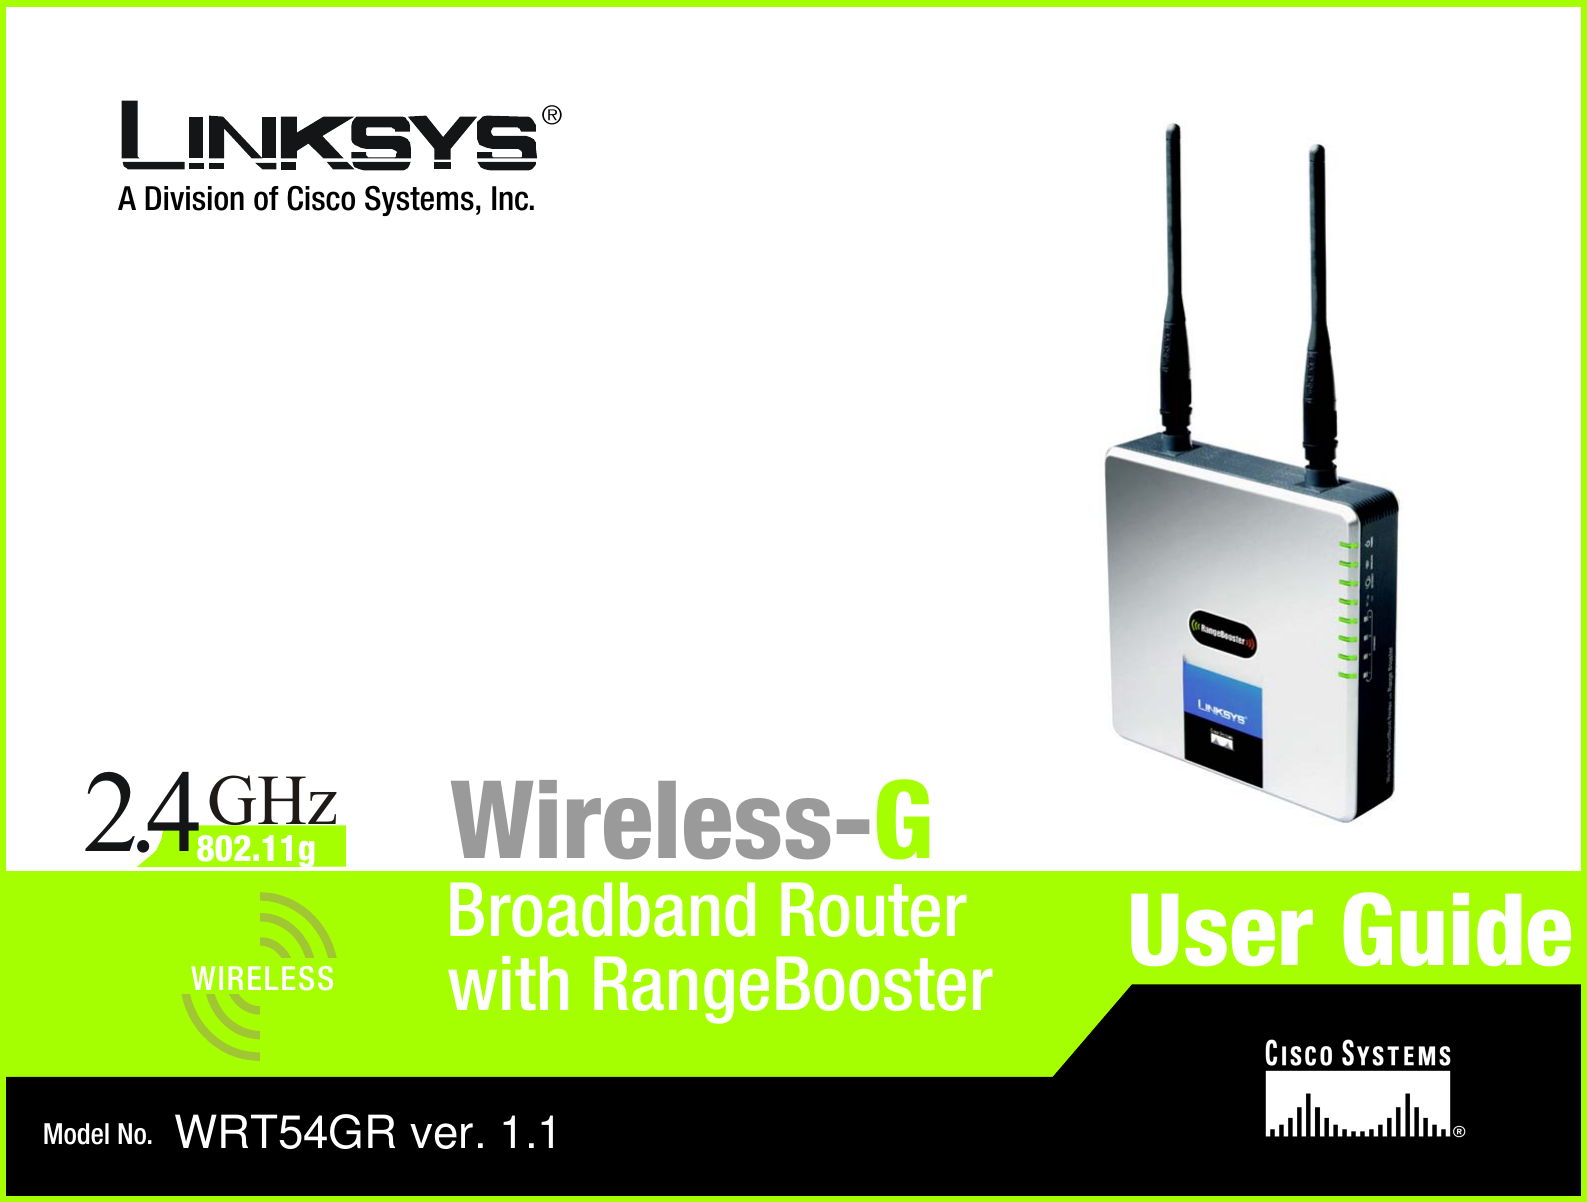 A Division of Cisco Systems, Inc.®Model No.Broadband RouterWireless-GWRT54GR ver. 1.1User GuideWIRELESSGHz2.4802.11gwith RangeBooster